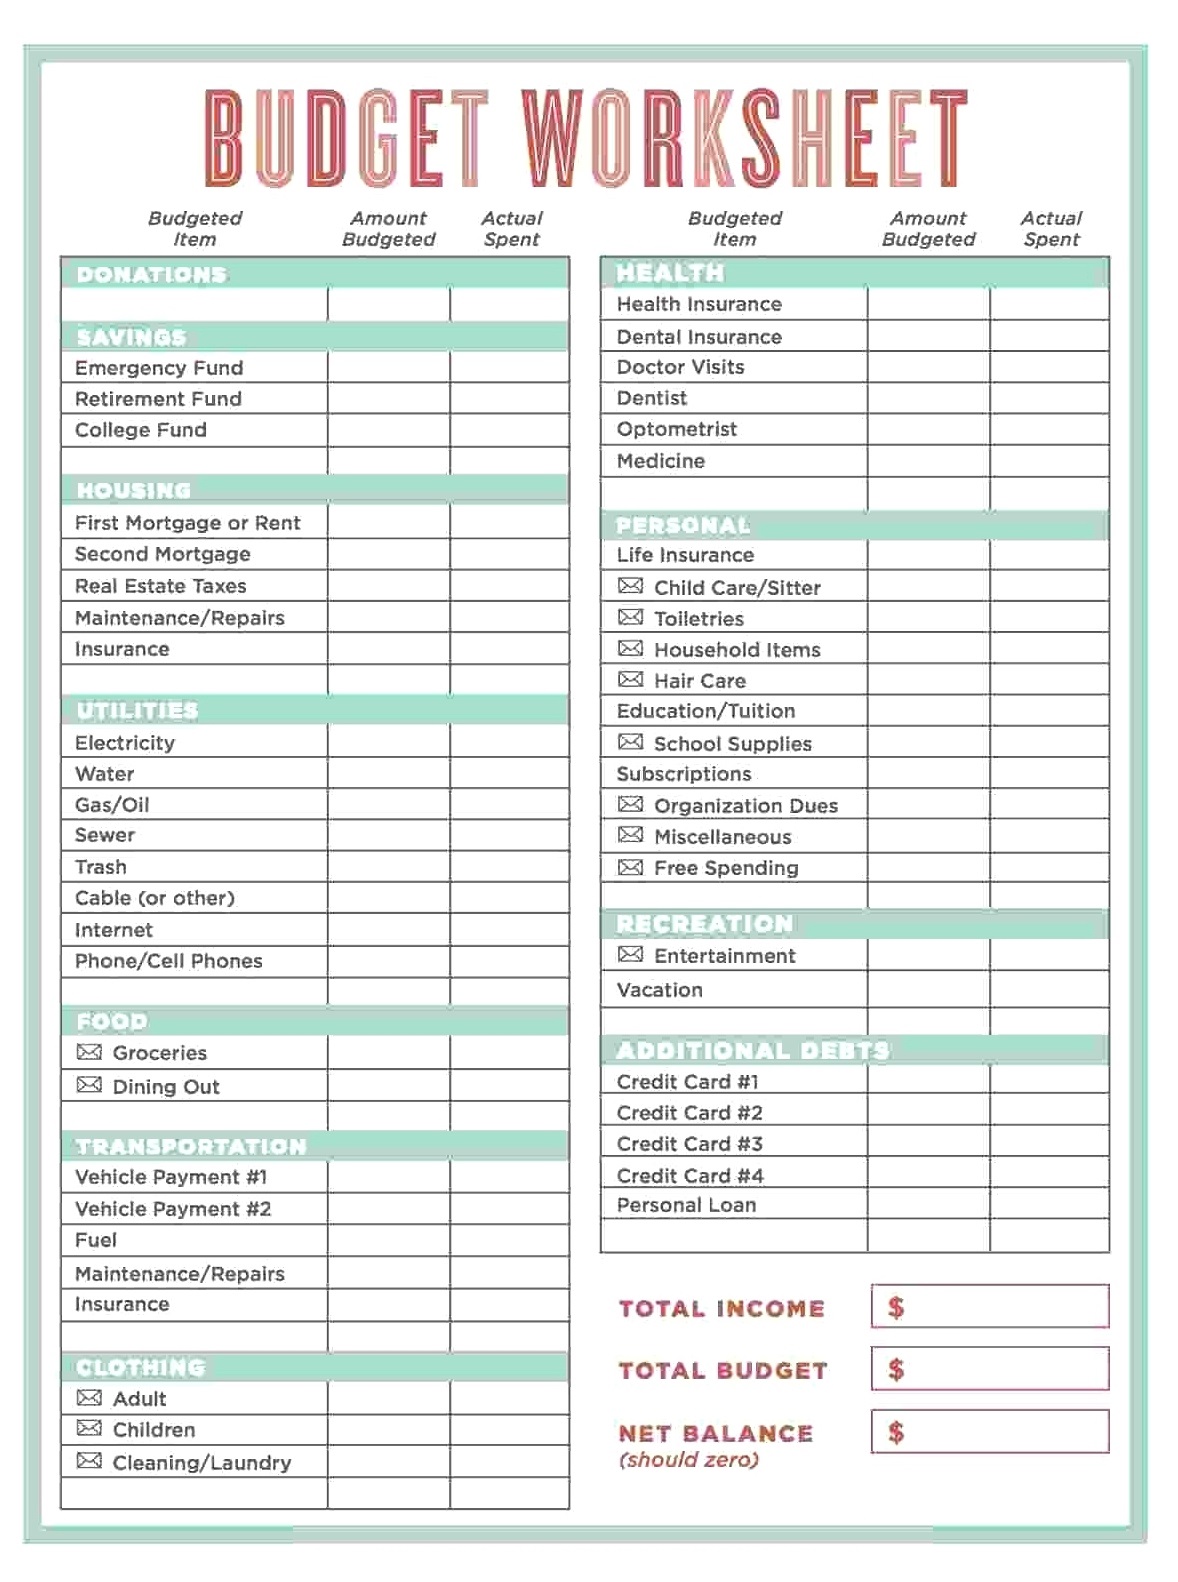 excel household budget template free